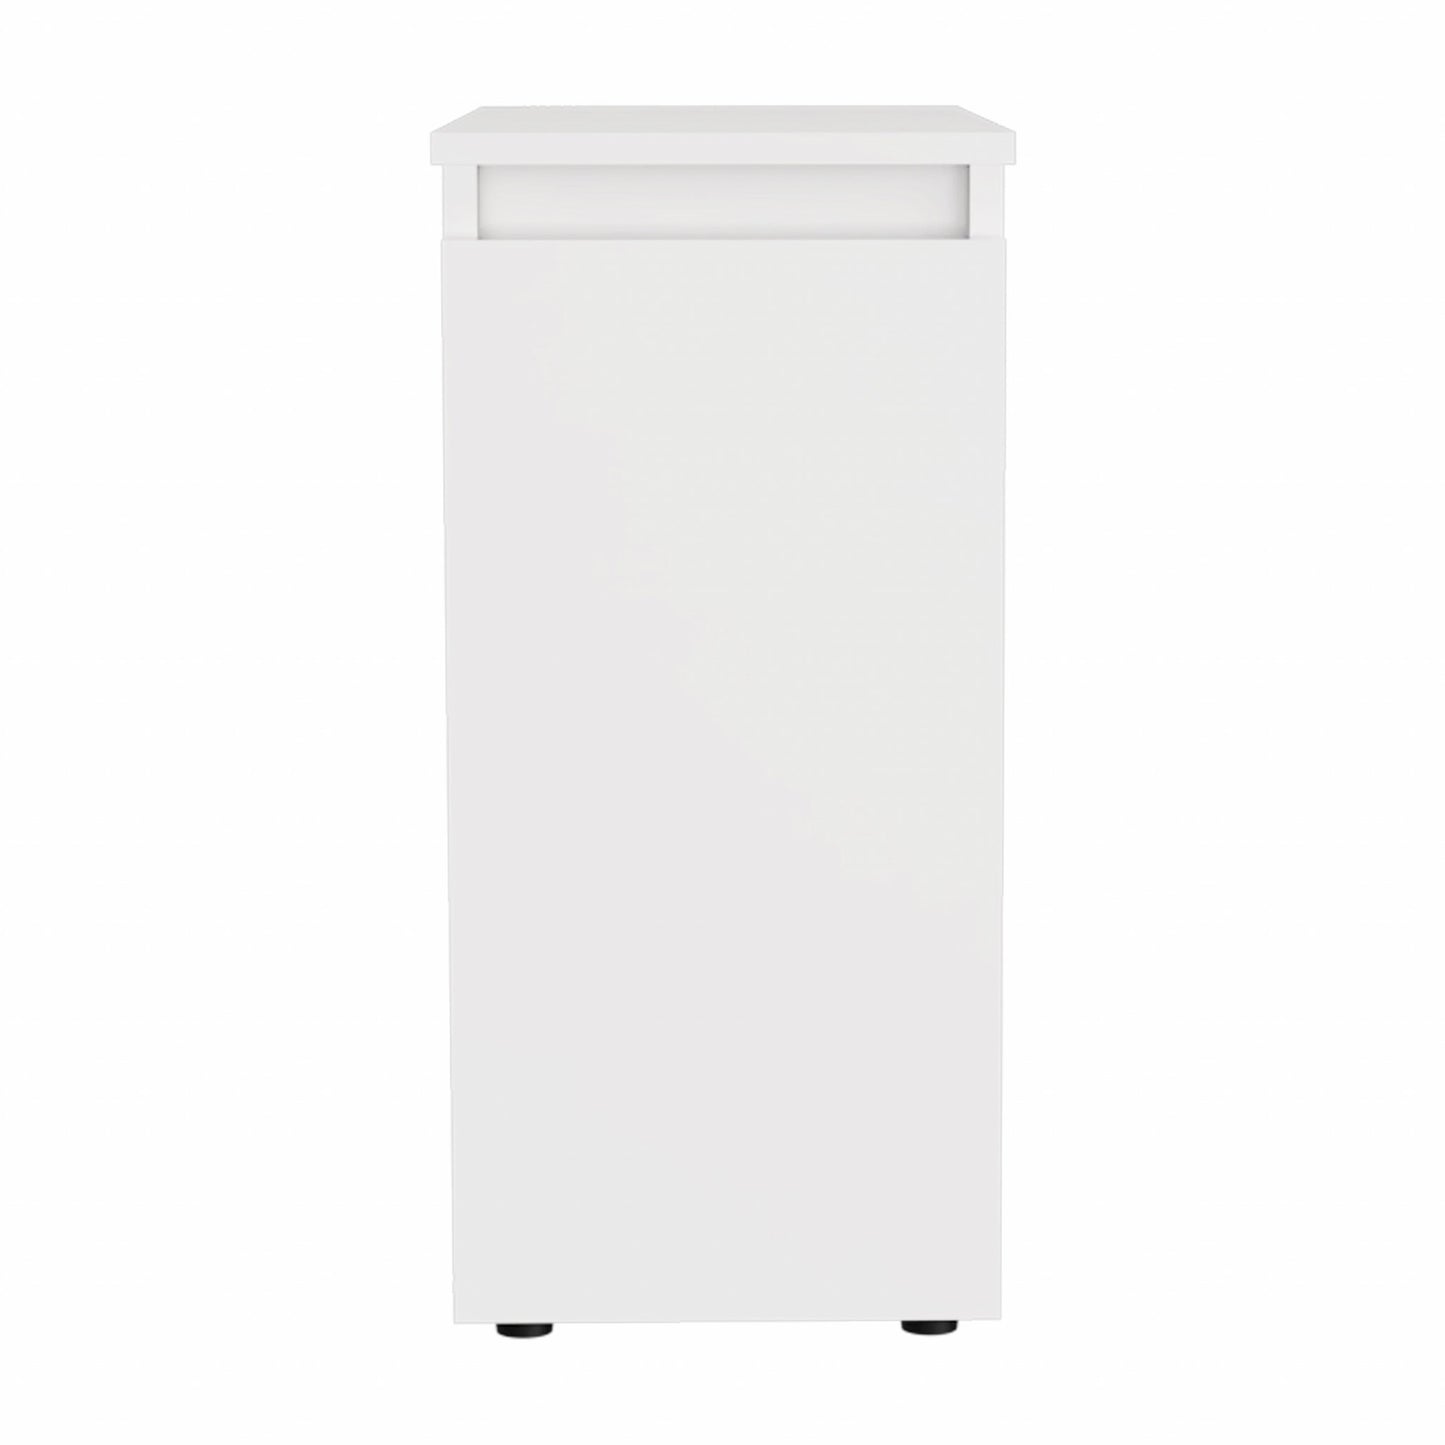 White Bathroom Cabinet with Top Shelf and Sliding Drawer-1